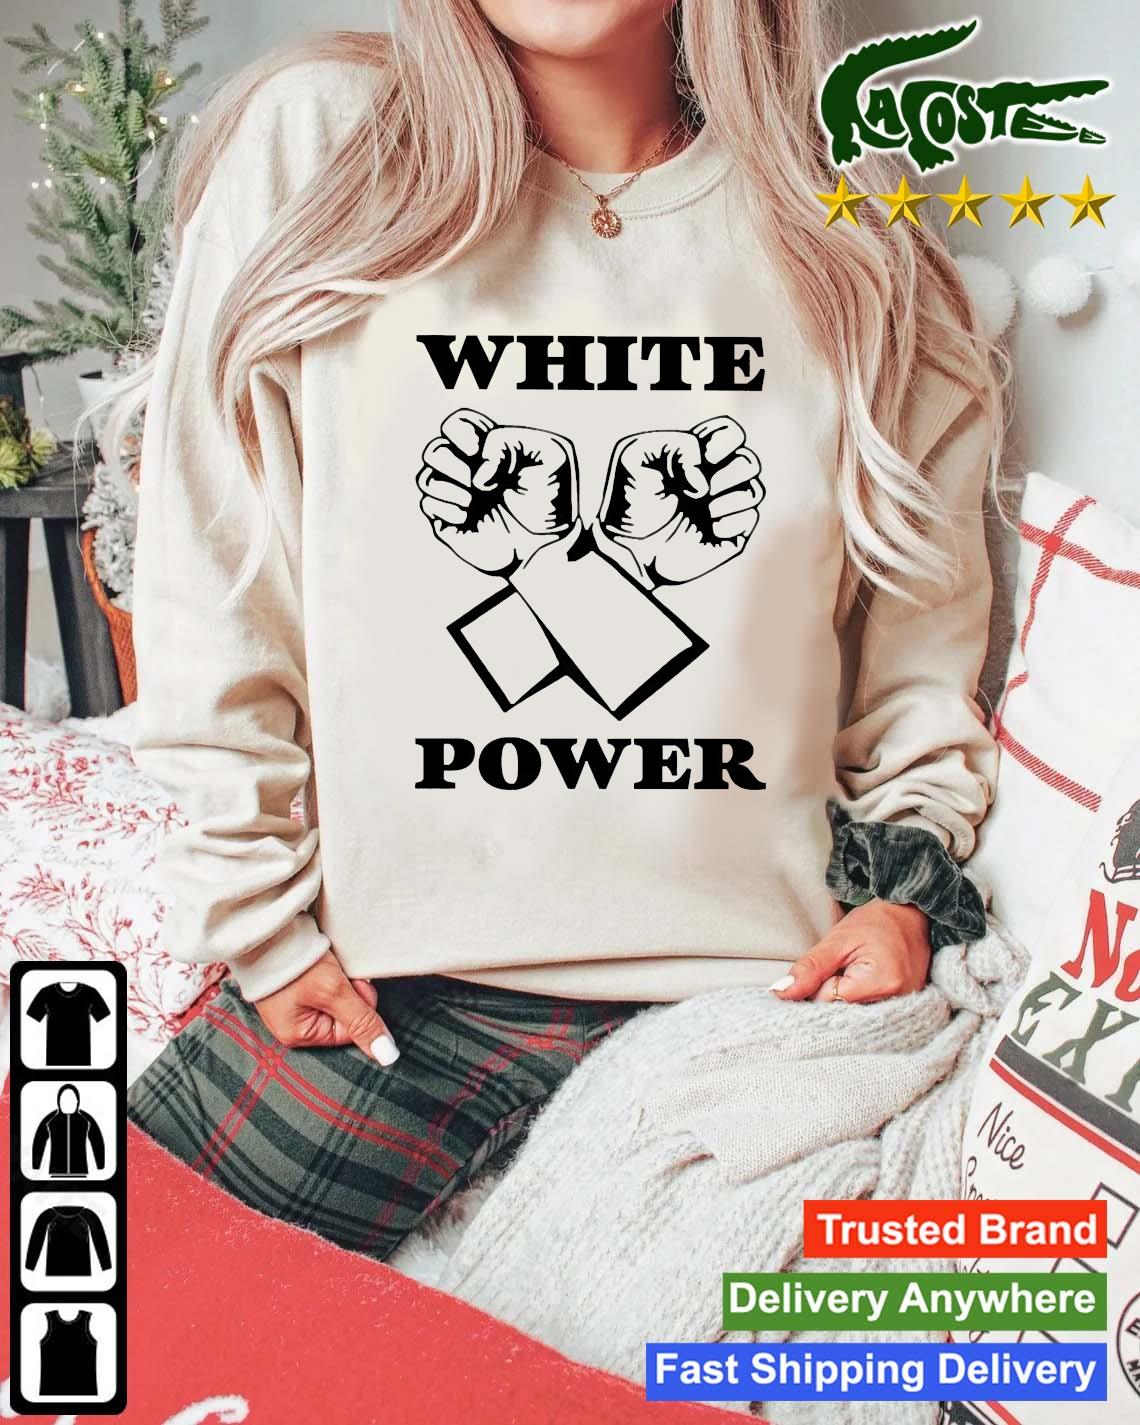 Official White Power Sweats Mockup Sweater